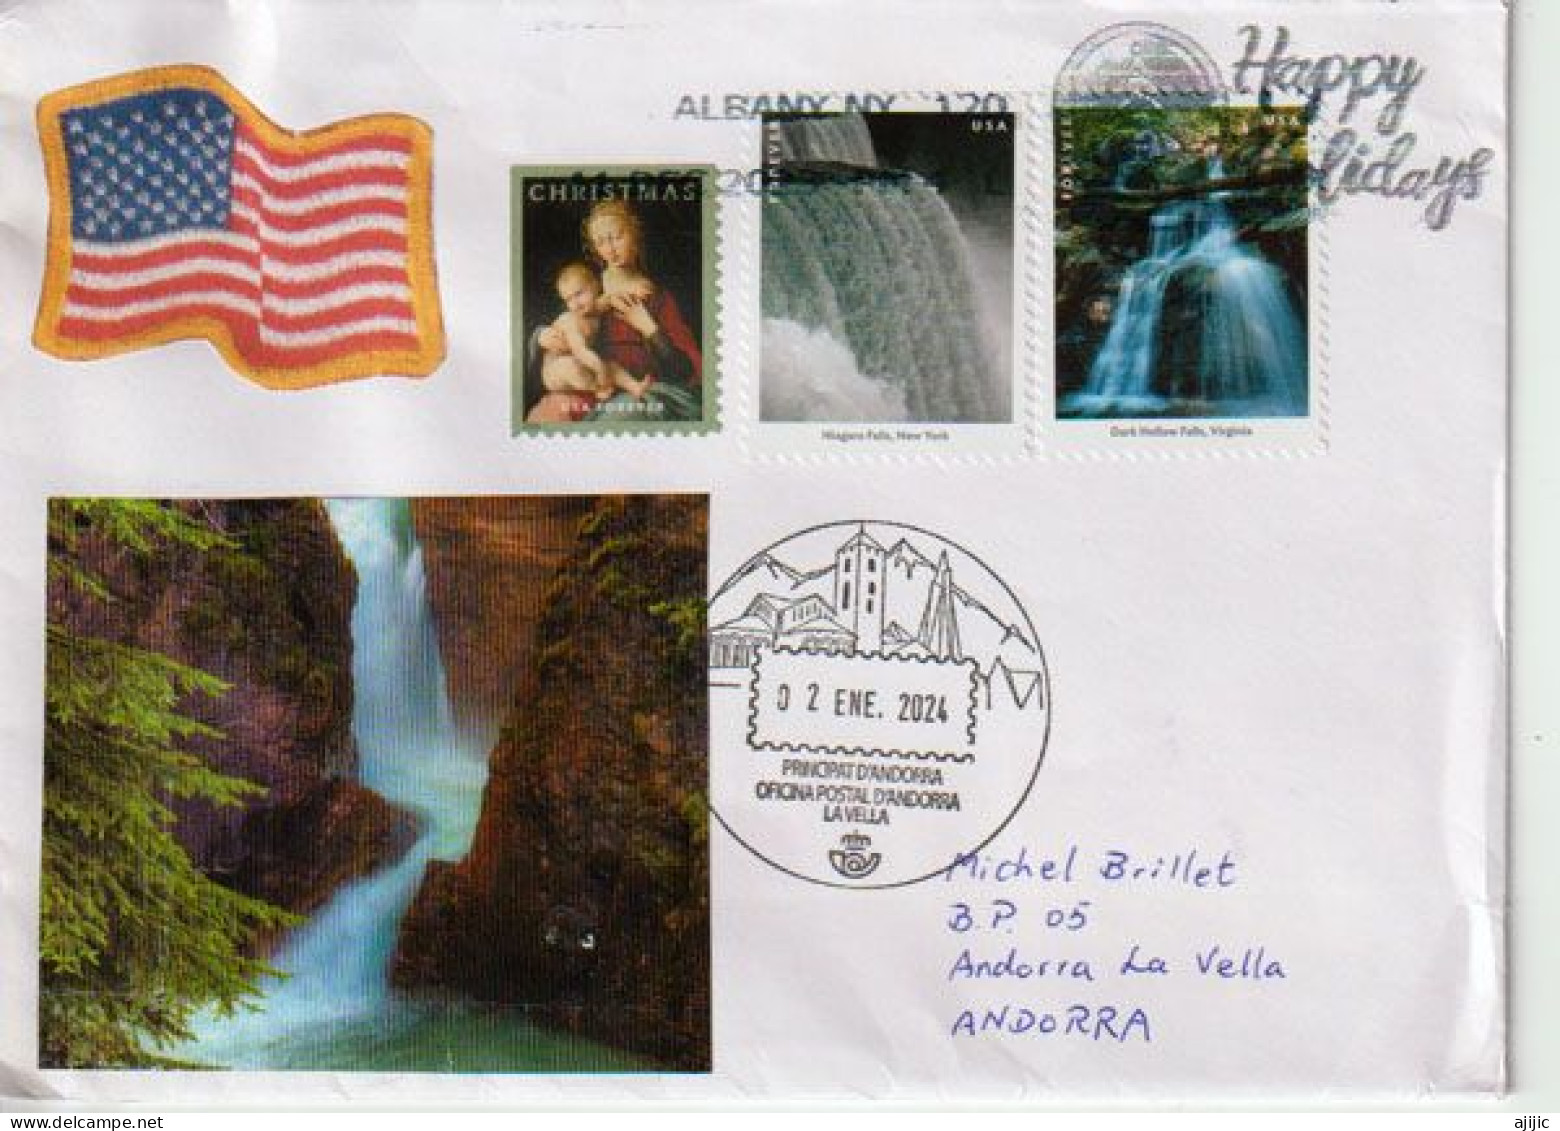 2023. Dark Hollow Falls (Shenandoah National Park) ,Virginia, Letter USA To Andorra (Principality) With Arrival Postmark - Lettres & Documents